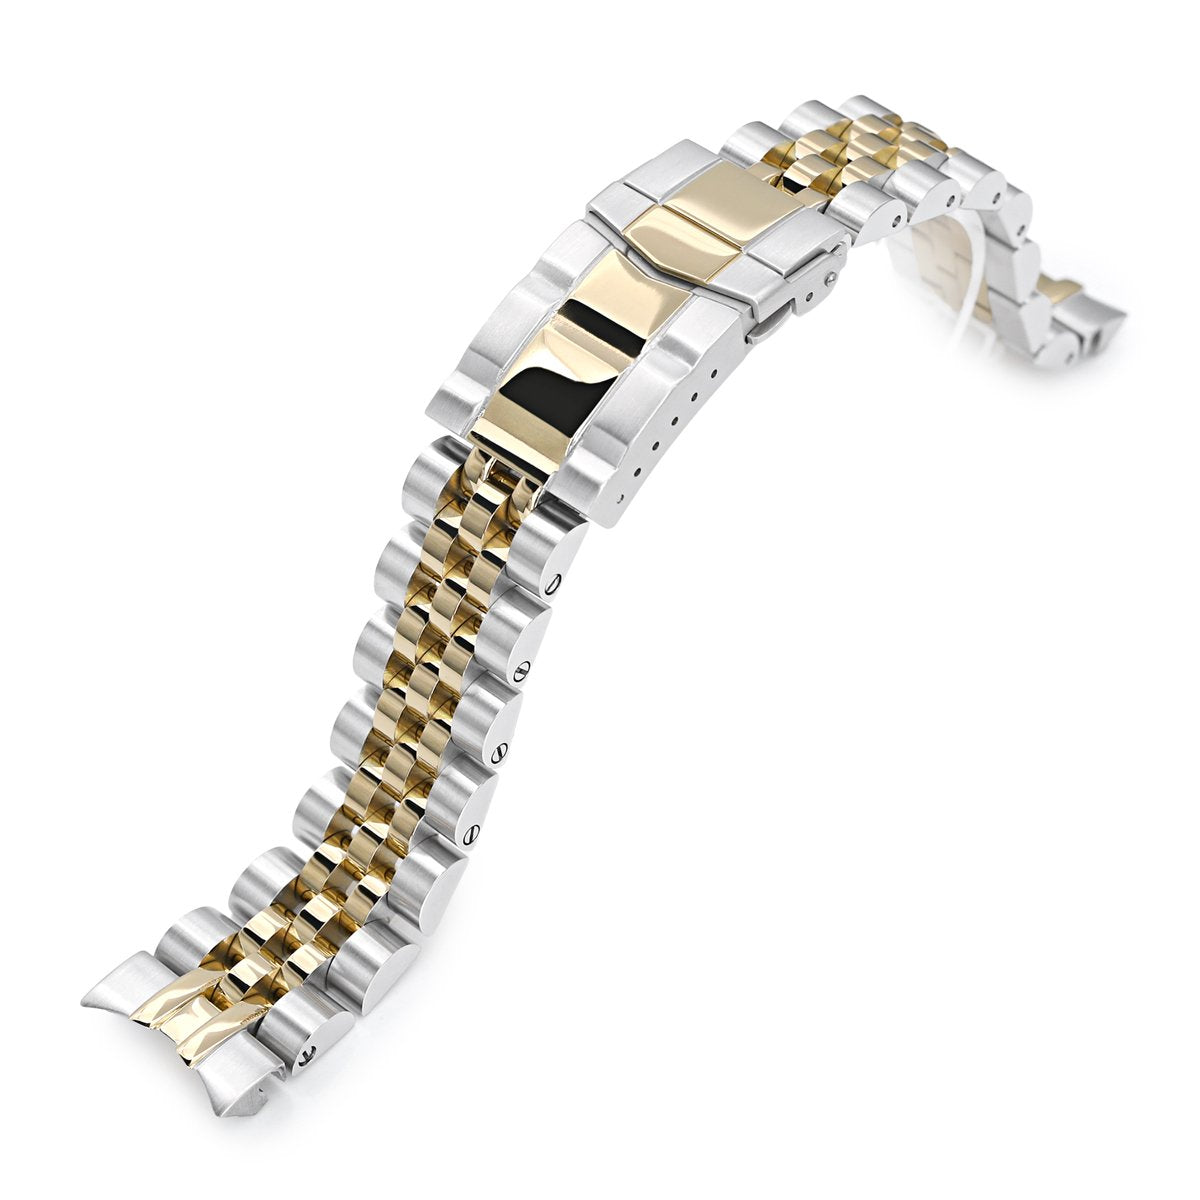 20mm Angus-J Louis 316L Stainless Steel Watch Bracelet for Seiko Mechanical Automatic SARB033 Two Tone IP Gold SUB Clasp Strapcode Watch Bands